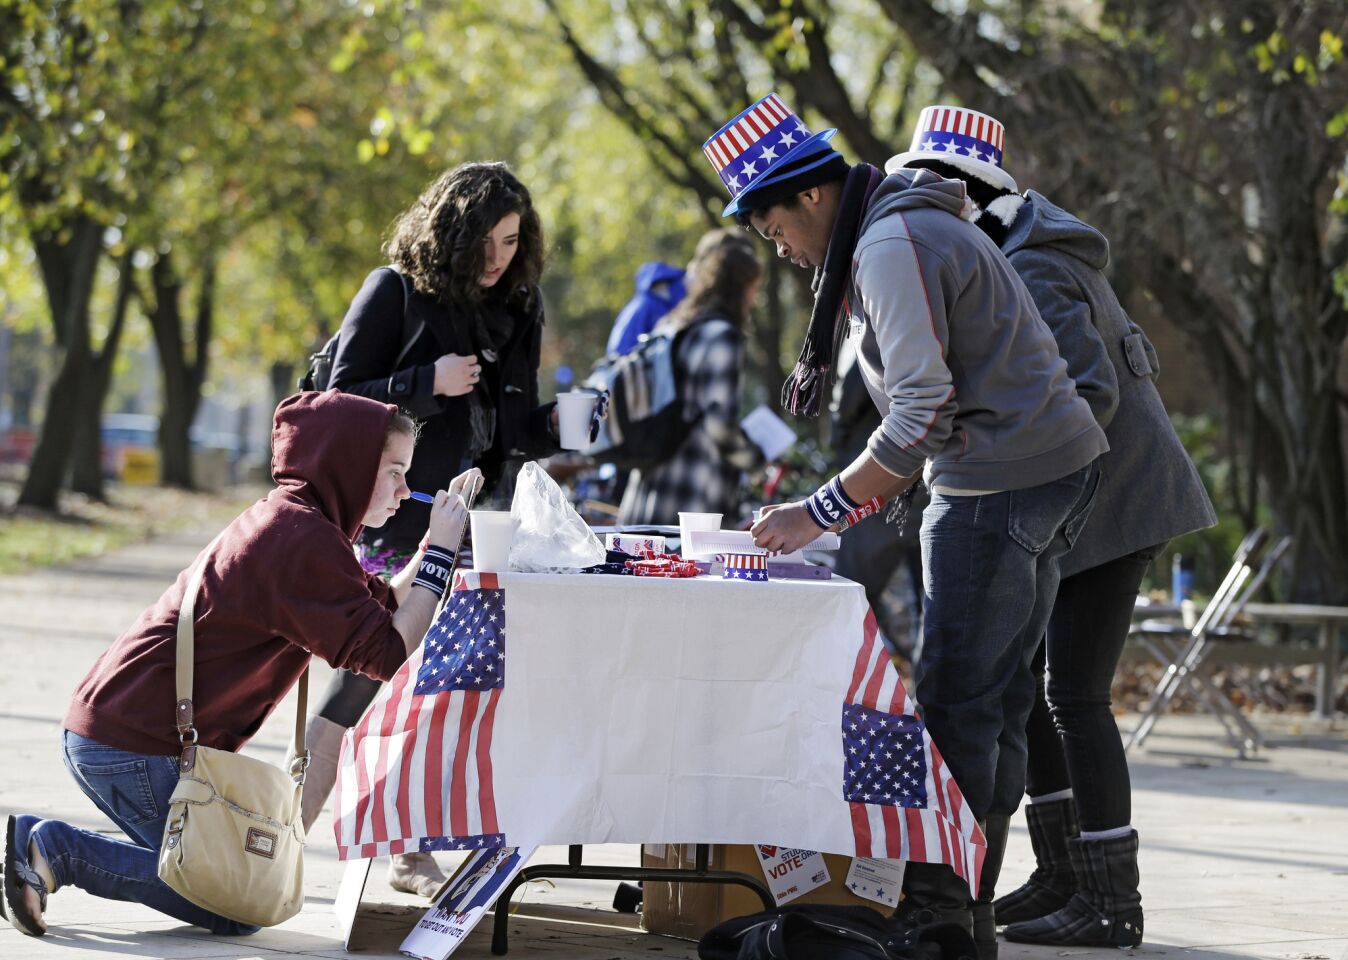 Classical studies major Omar Dyette, front right, mans a table outside the polls on the campus of Oberlin College in Oberlin, Ohio.